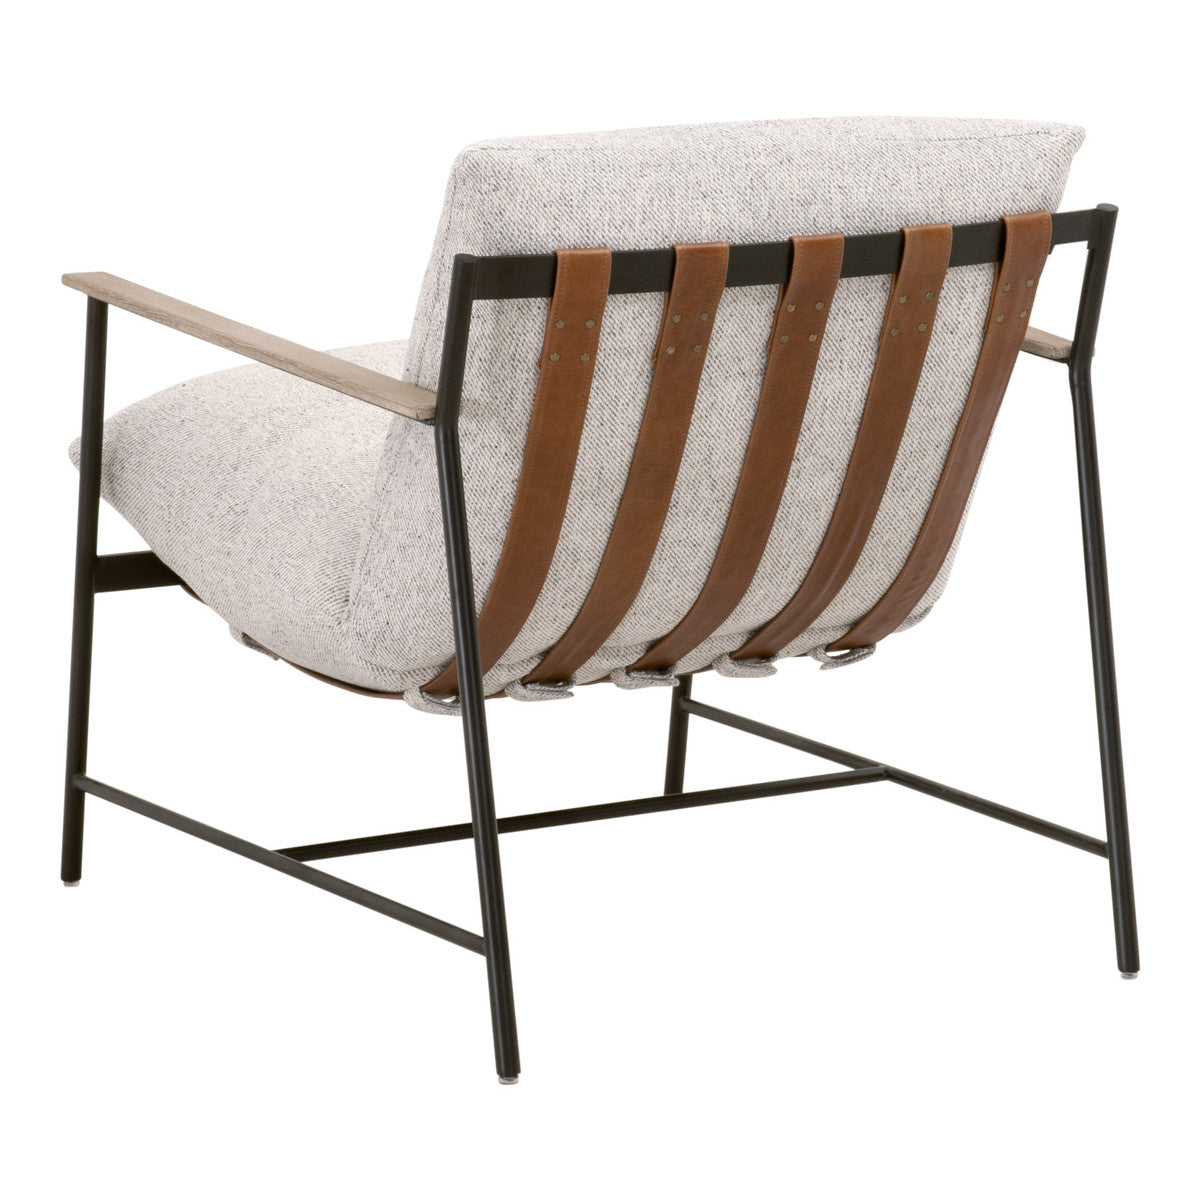 Brando Club Chair in Howell Natural